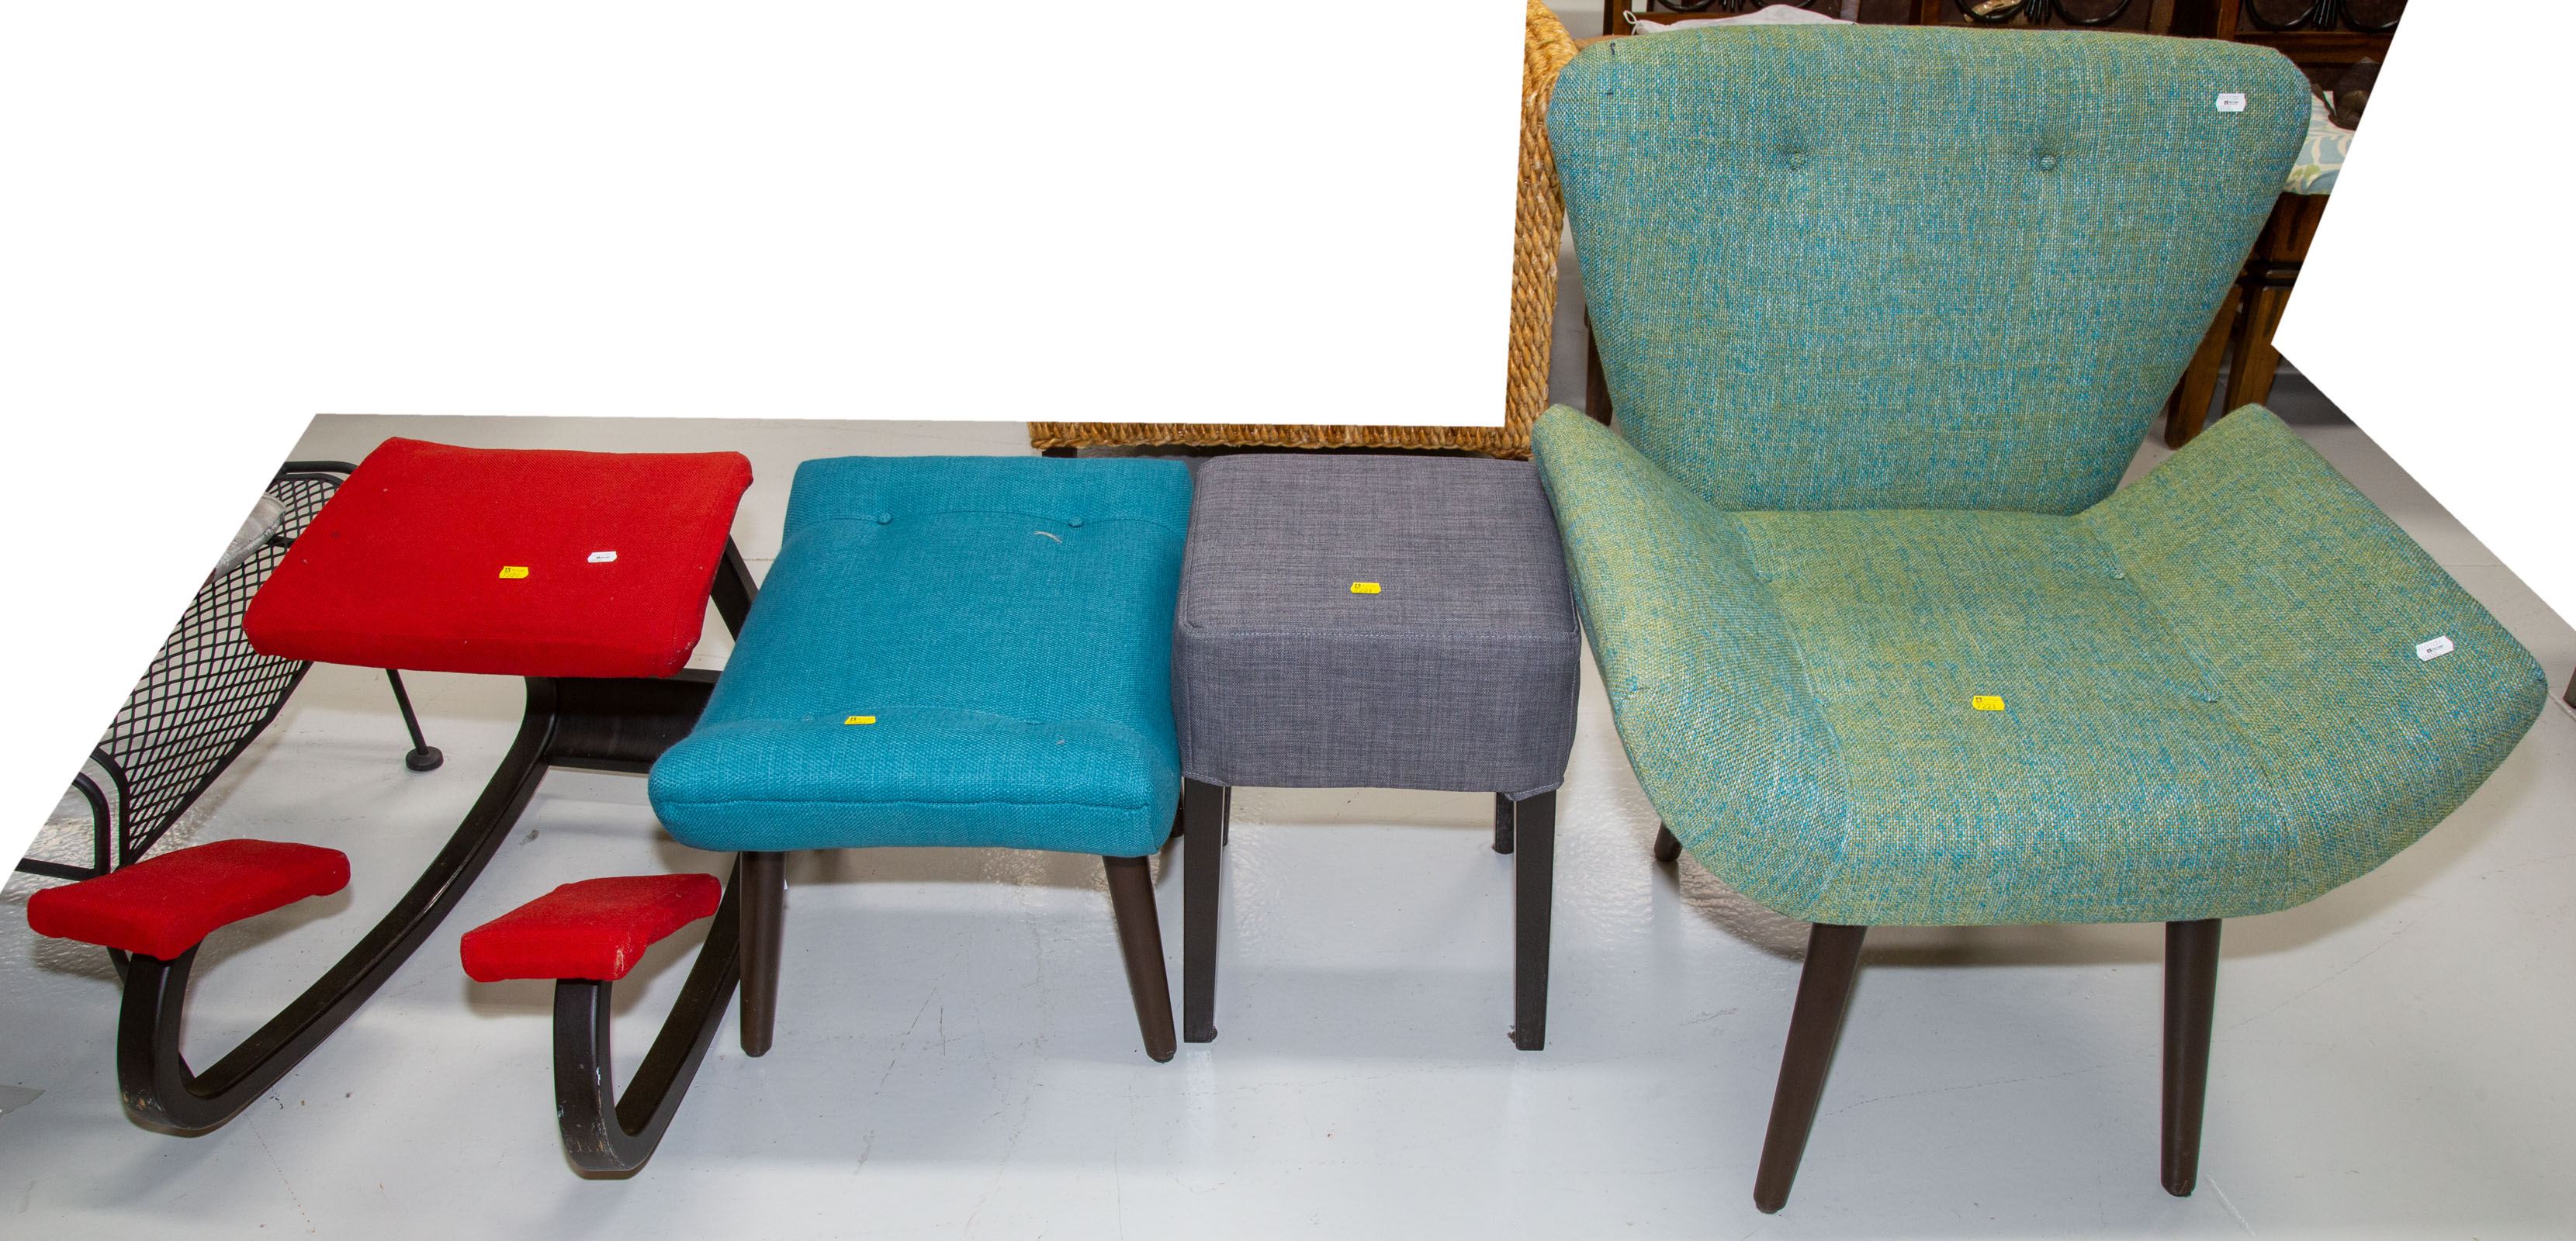 FOUR PIECES OF MID CENTURY MODERN 28967a